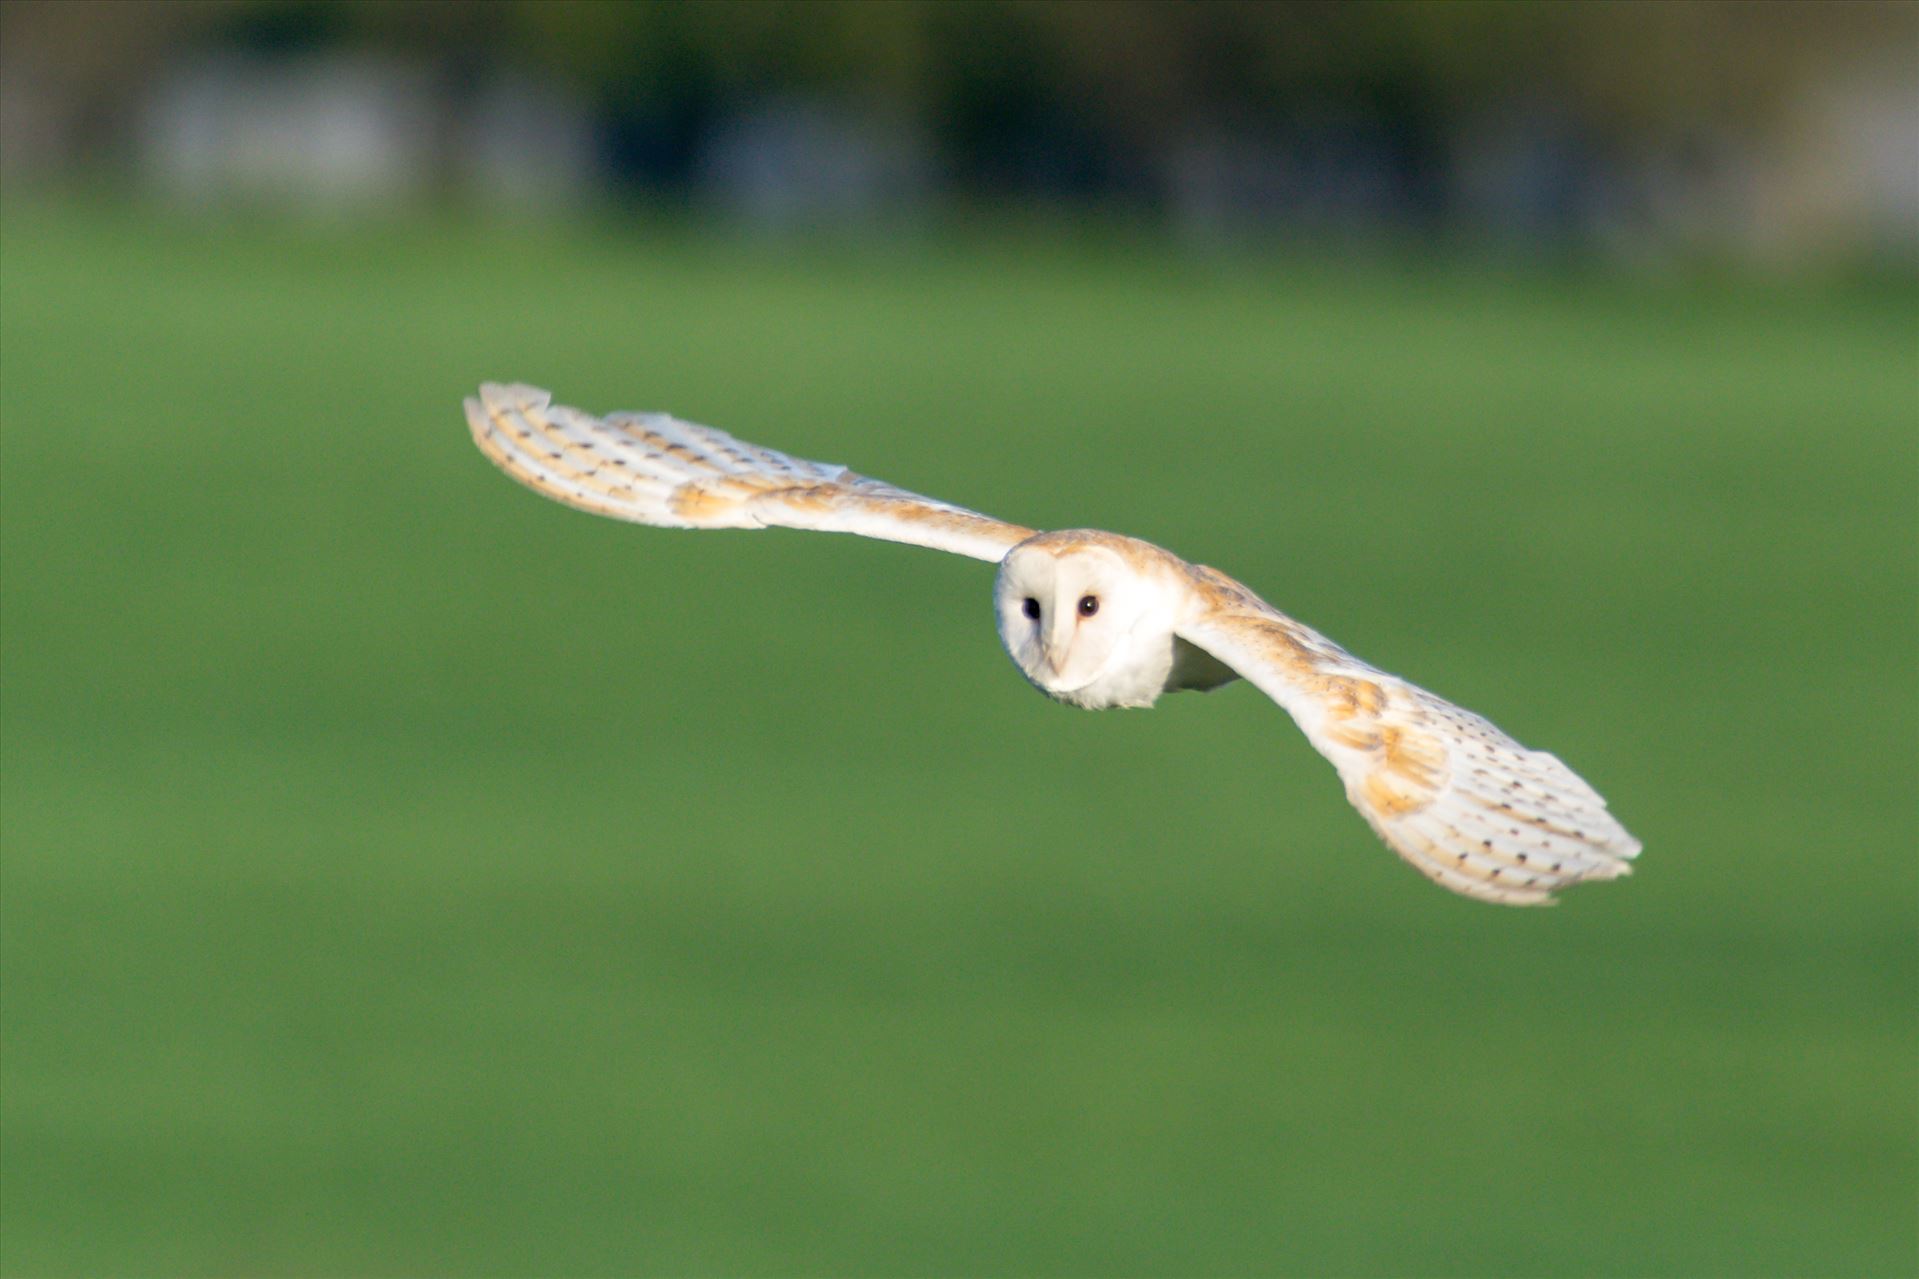 Barn Owl on the hunt 04 - A Barn Owl on the hunt for its breakfast by AJ Stoves Photography